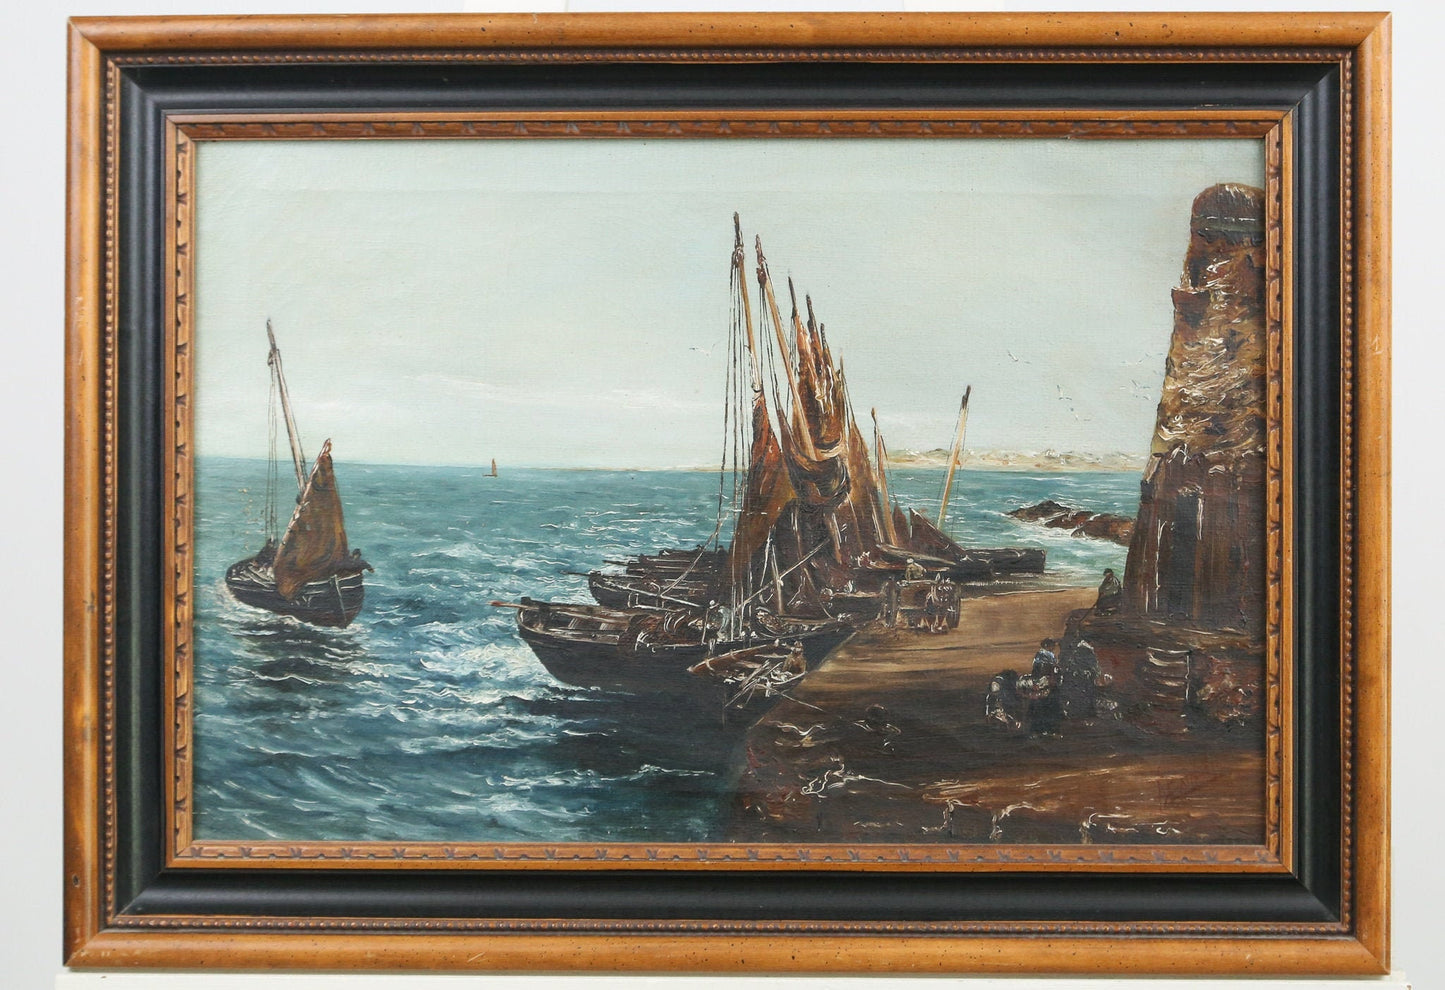 Painting Seascape Oil on Canvas Harbor Boats Signed A Bain 1911 Framed